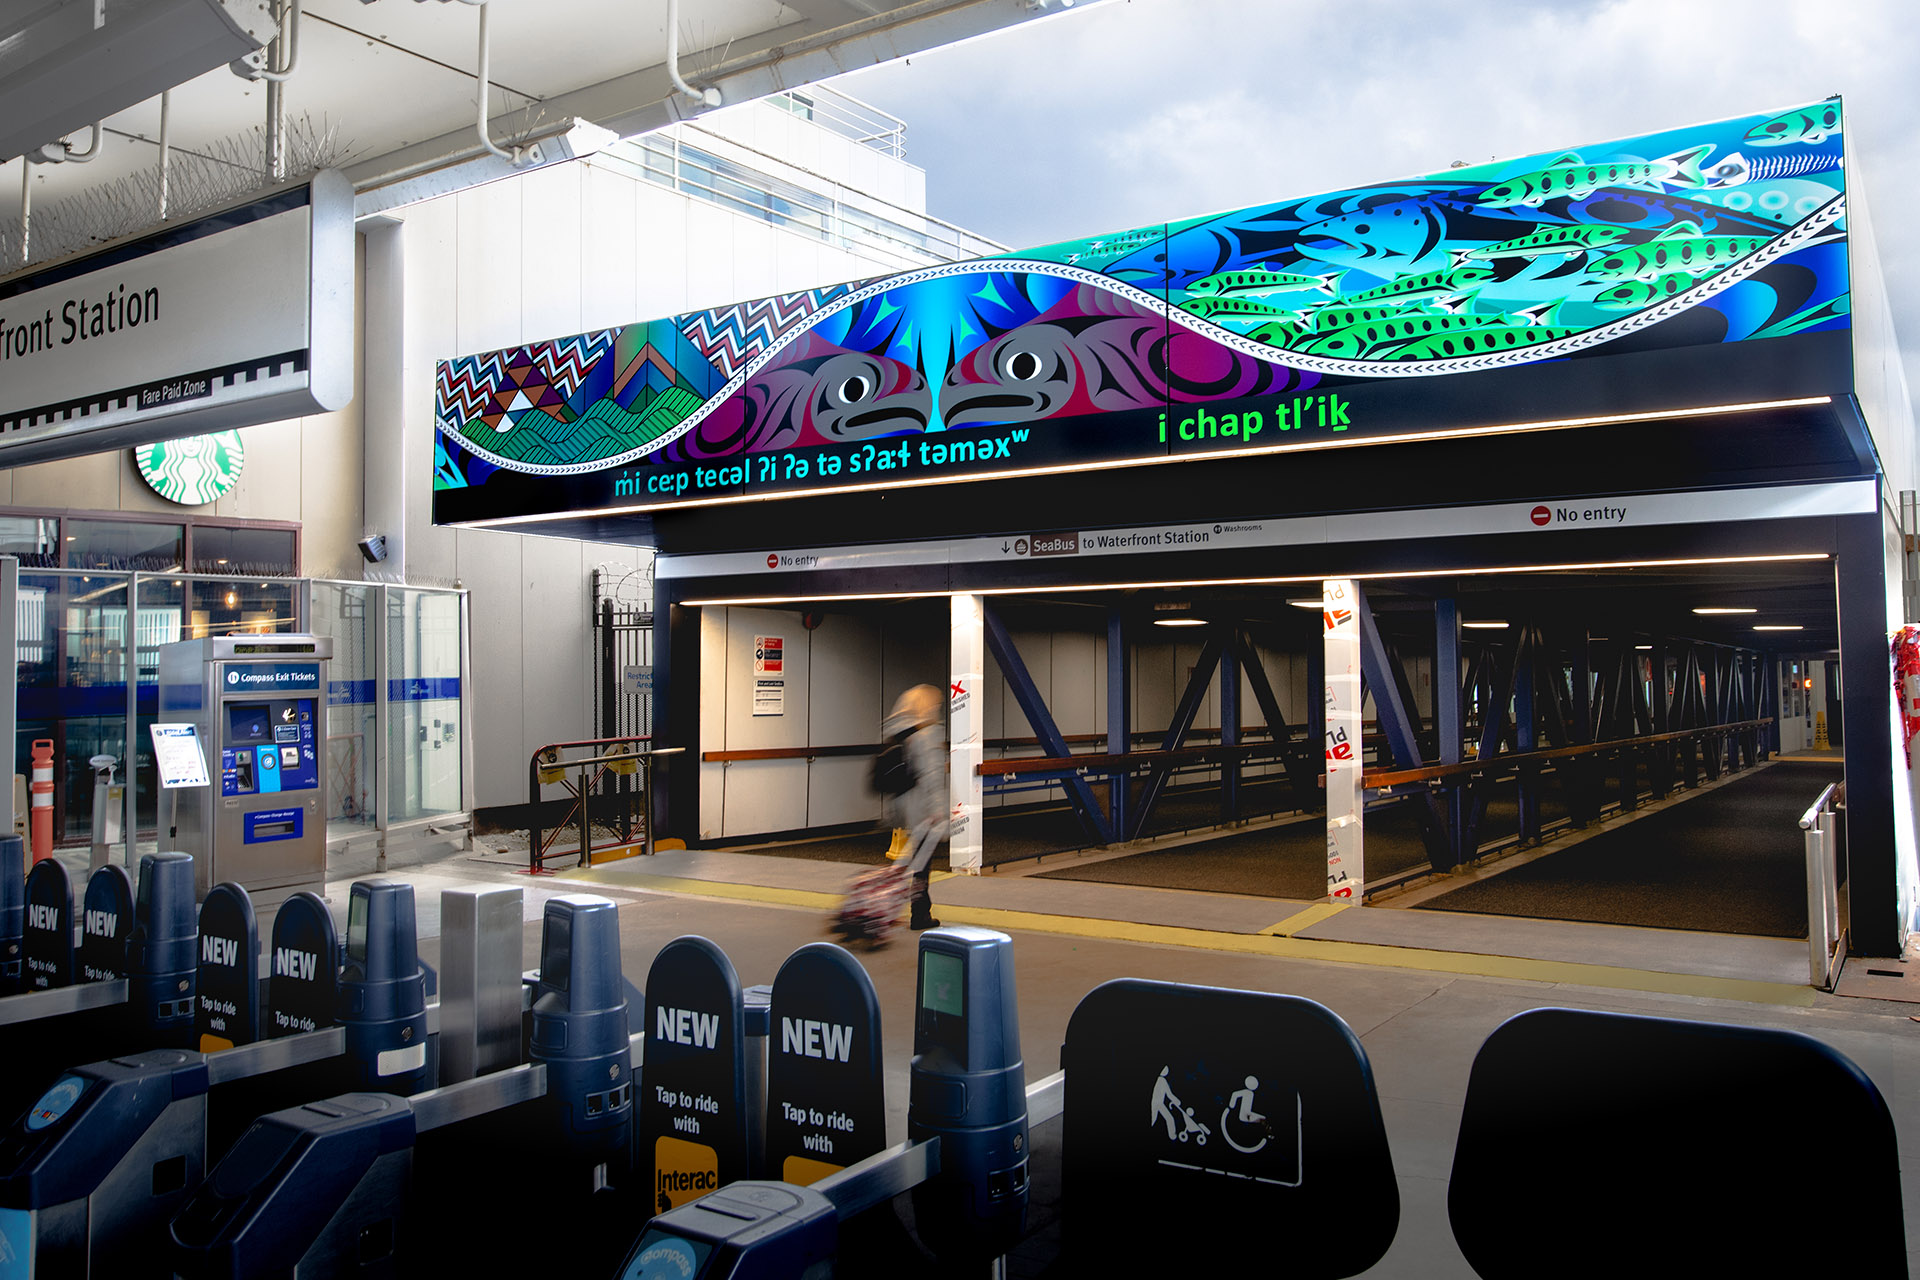 The entrance canopy at the Lonsdale Quay terminal displaying Indigenous art and language